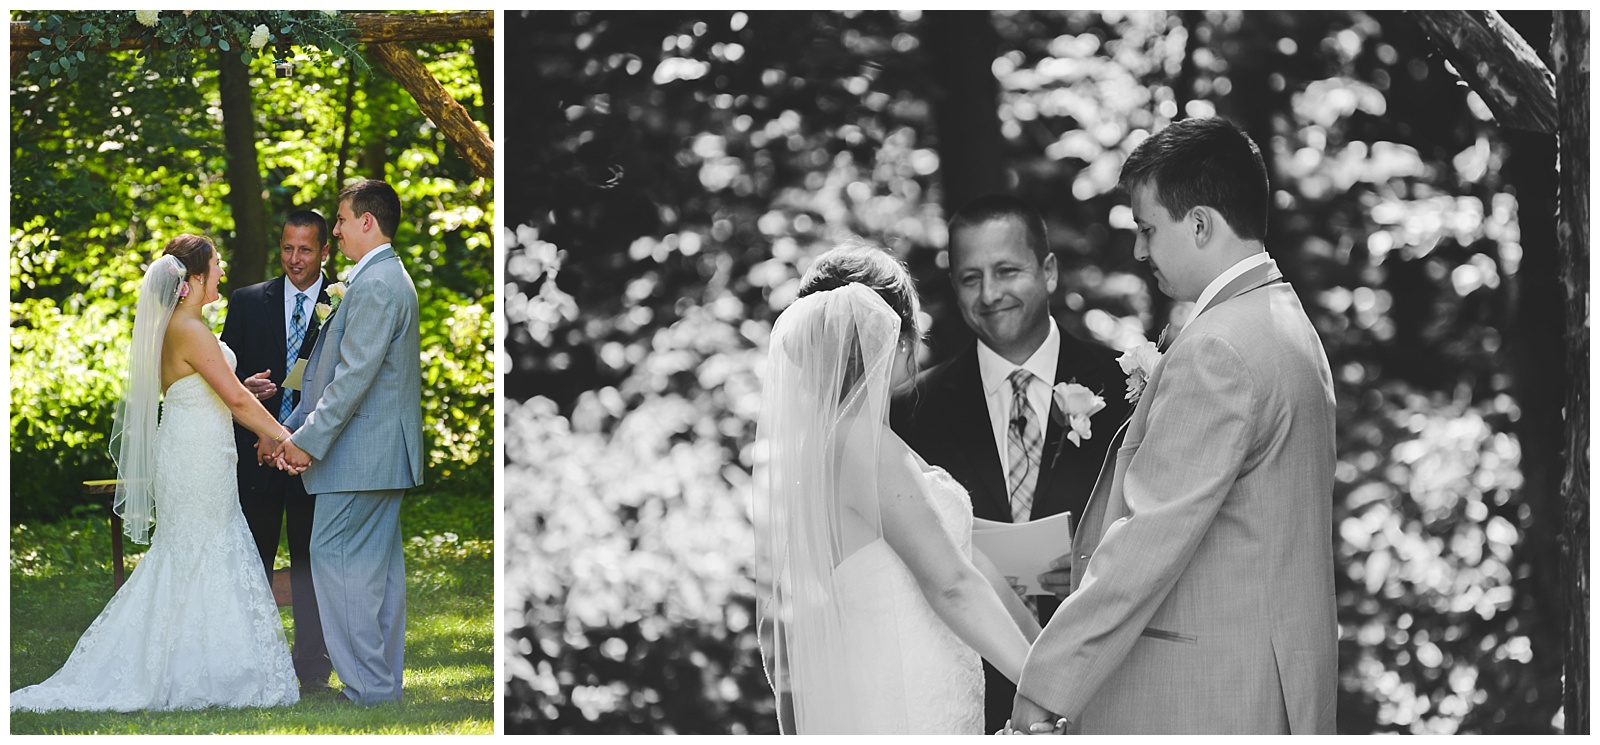 Our Wedding Day | Monica Brown Photography | monicabrownphoto.com